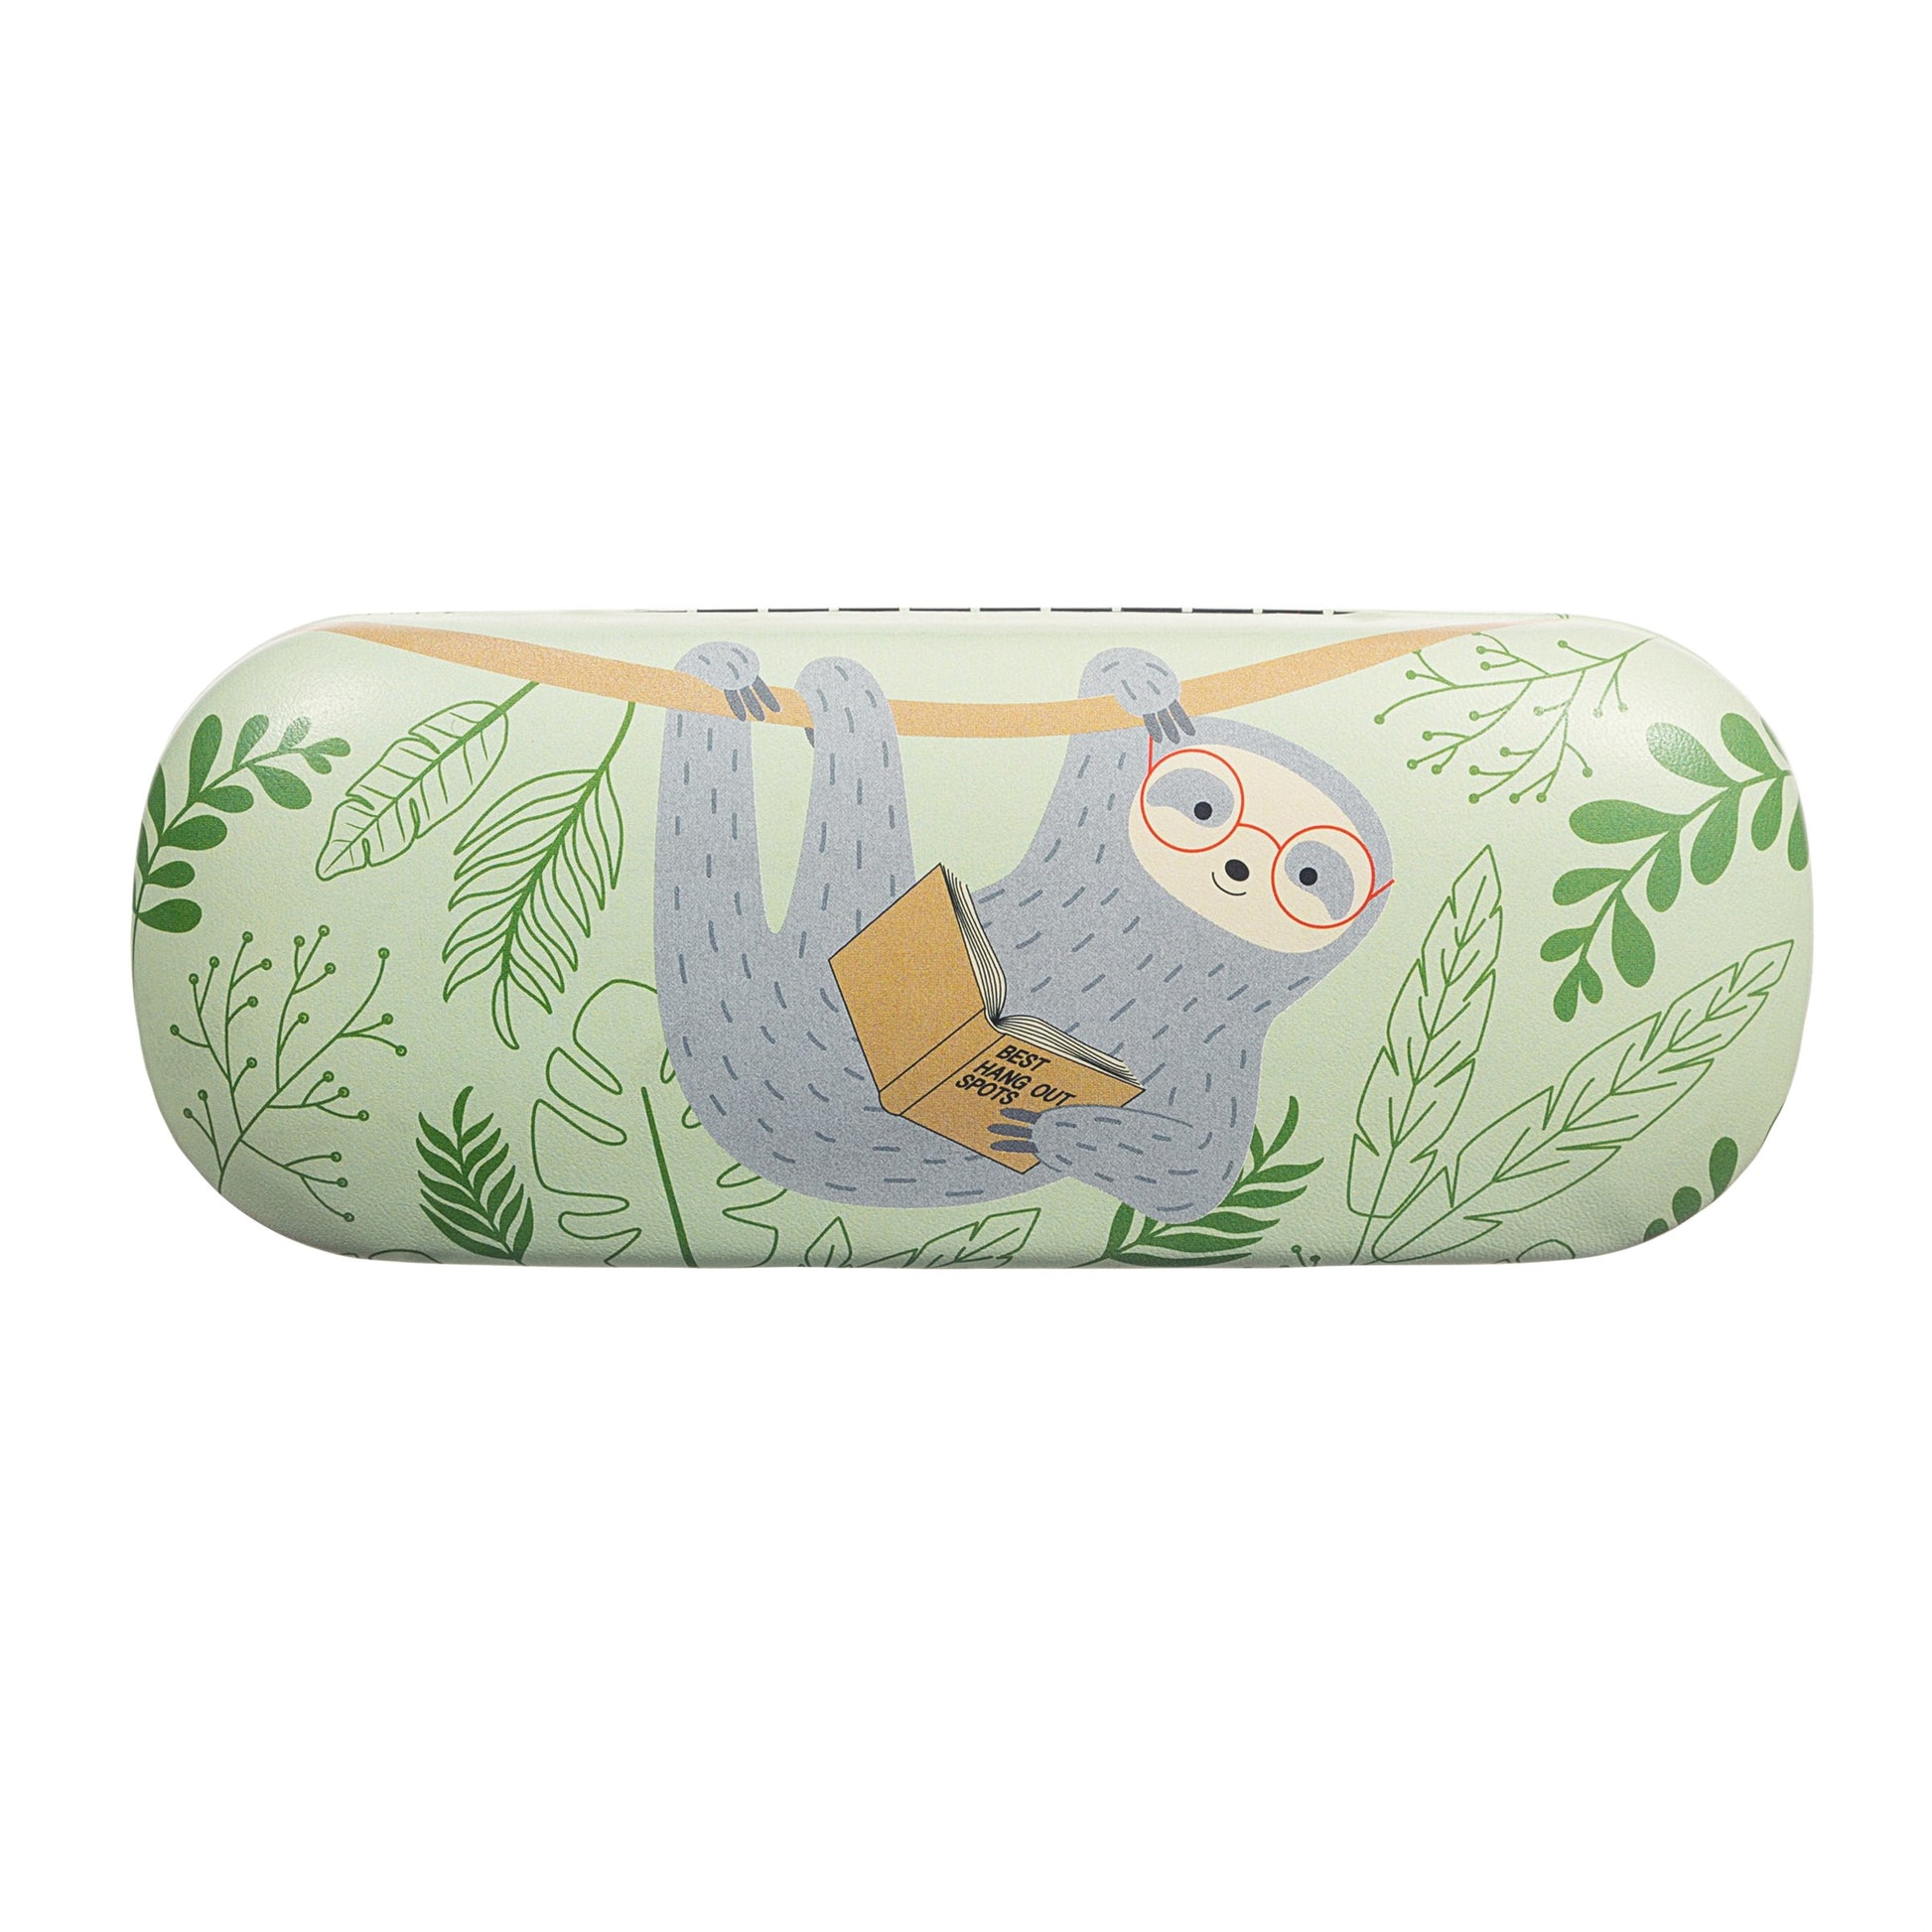 Keep your glasses safe and stylish with our Sloth Glasses Case from our collection. This charming case features our joyful sloth character and leafy greens and soft greys colourway that will brighten up any day. The soft interior and cleaning cloth will keep your glasses protected and clean, making this glasses case a must-have accessory.